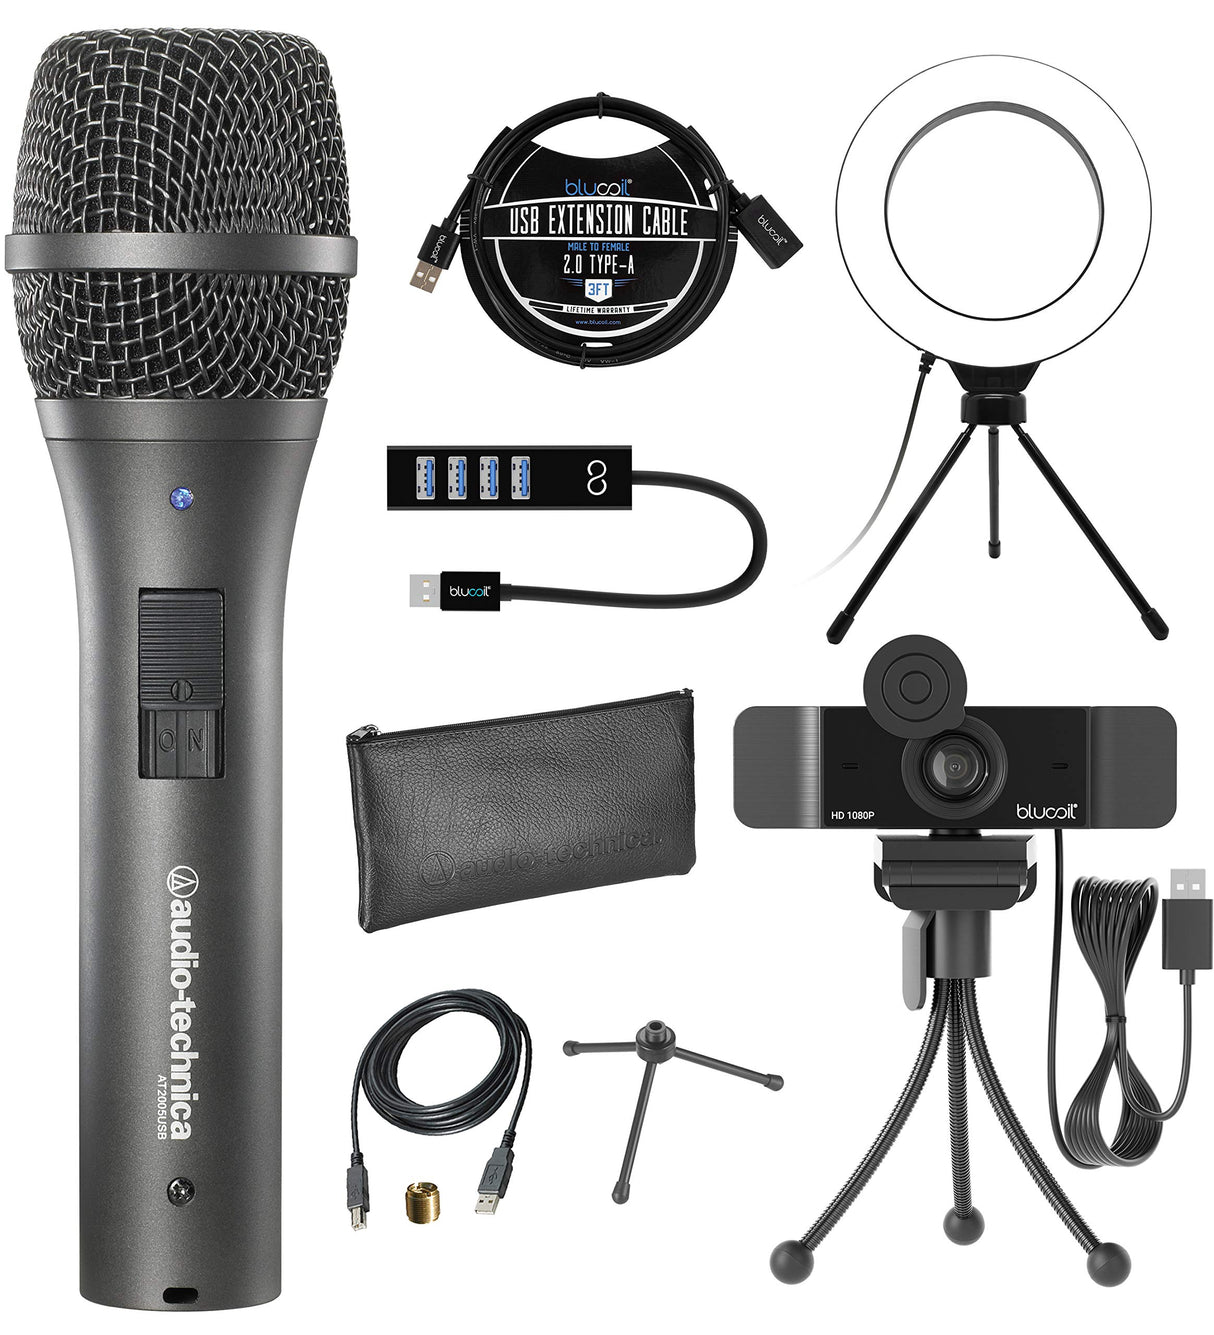 Audio-Technica AT2005USB Cardioid Dynamic USB/XLR Microphone for PA Systems, Windows and Mac Bundle with Blucoil 1080p USB Webcam, 6" Ring Light, USB-A Mini Hub, and 3' USB Extension Cable